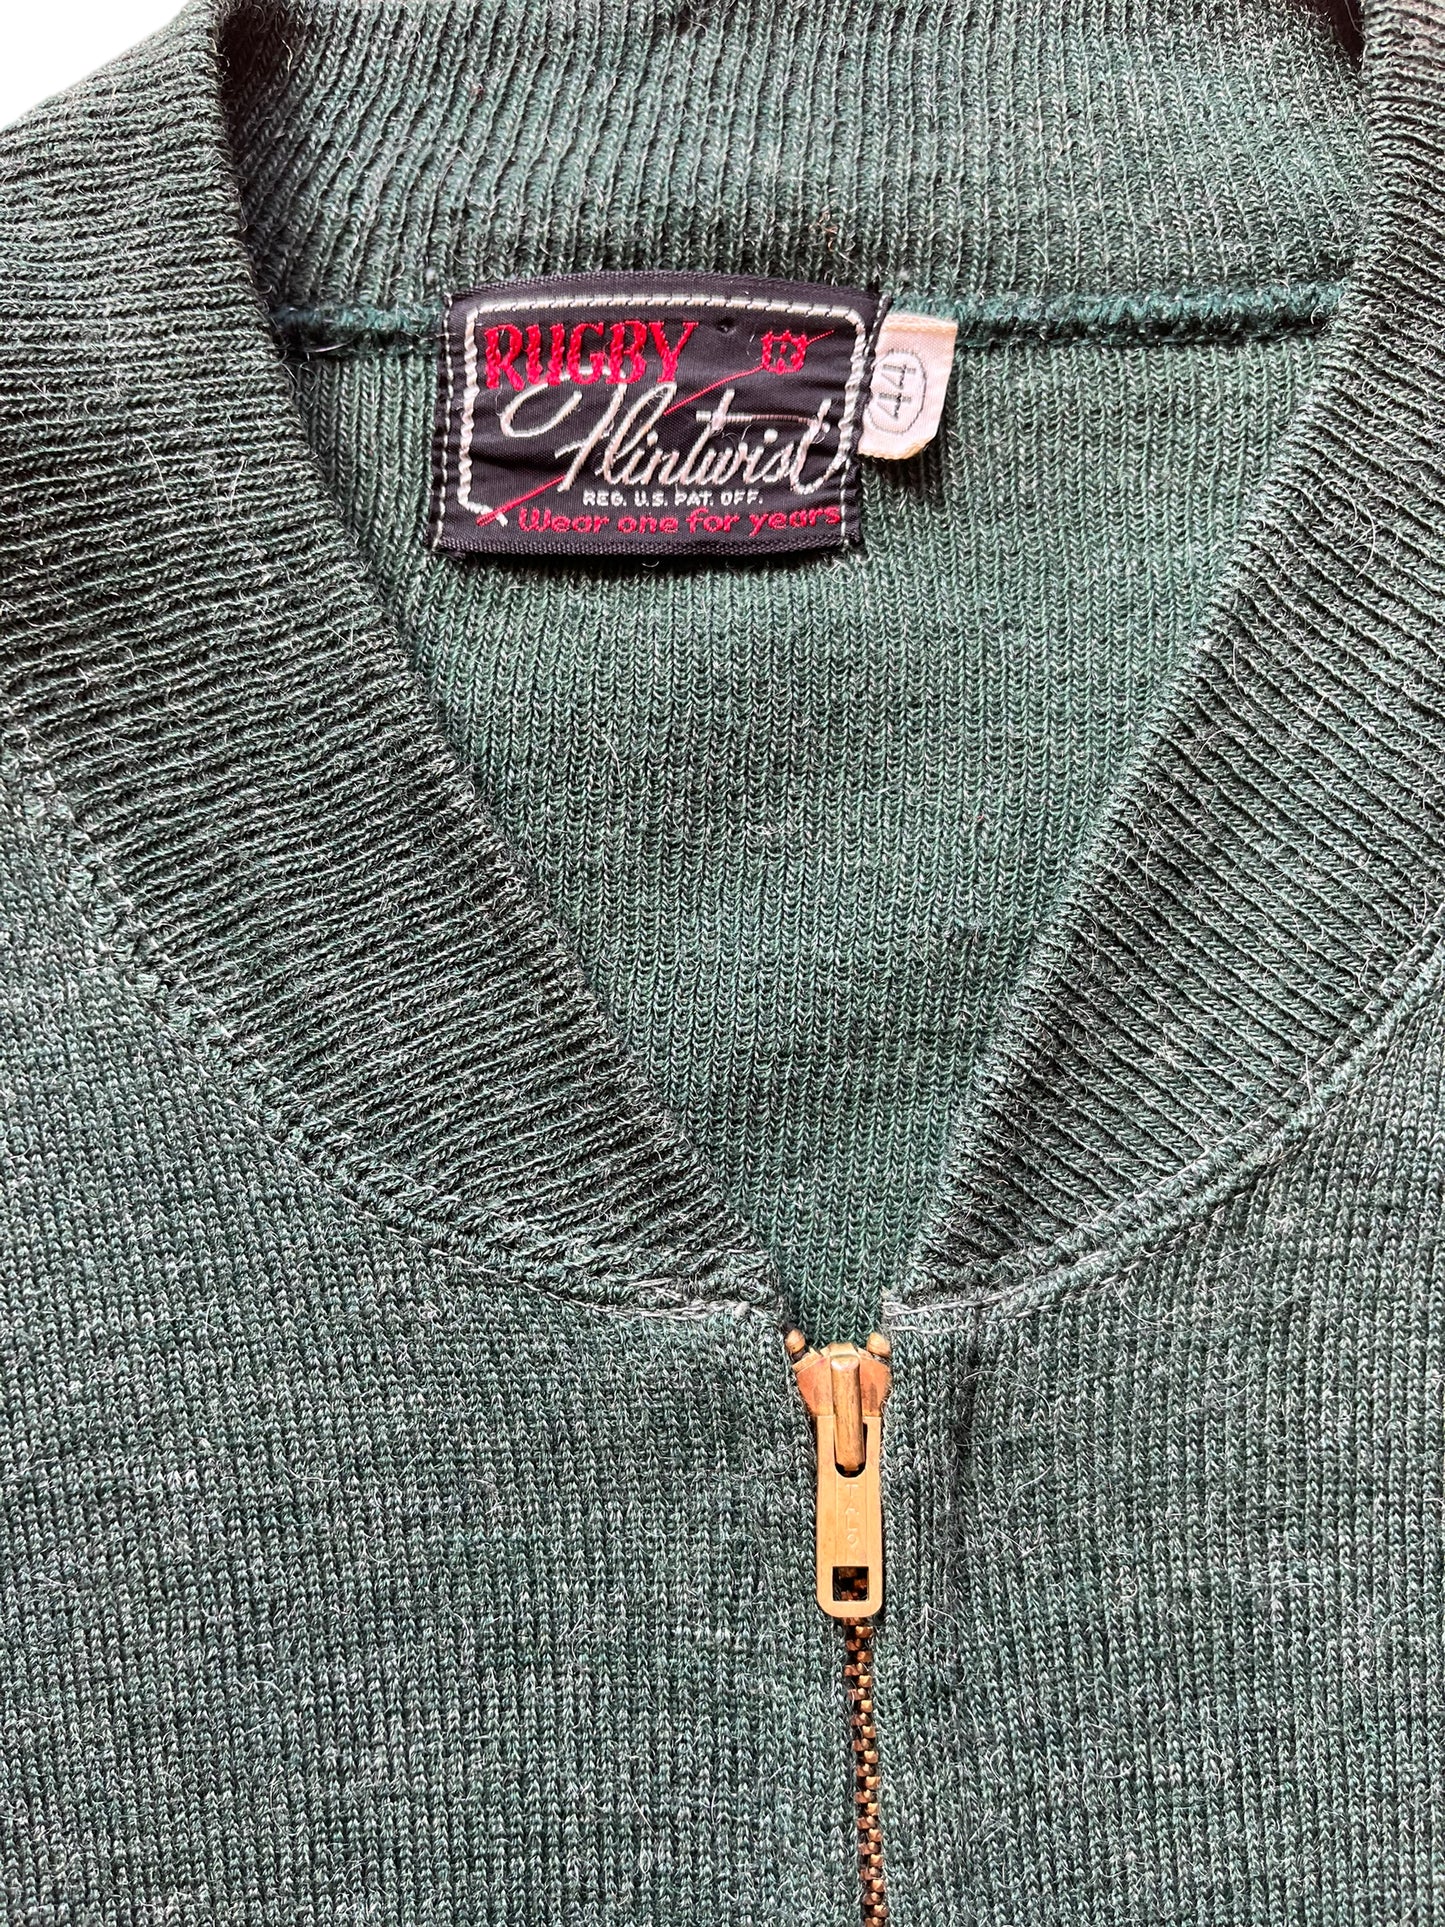 Front zipper and tag view of Vintage 1950s Flintwist Rugby Sweater 